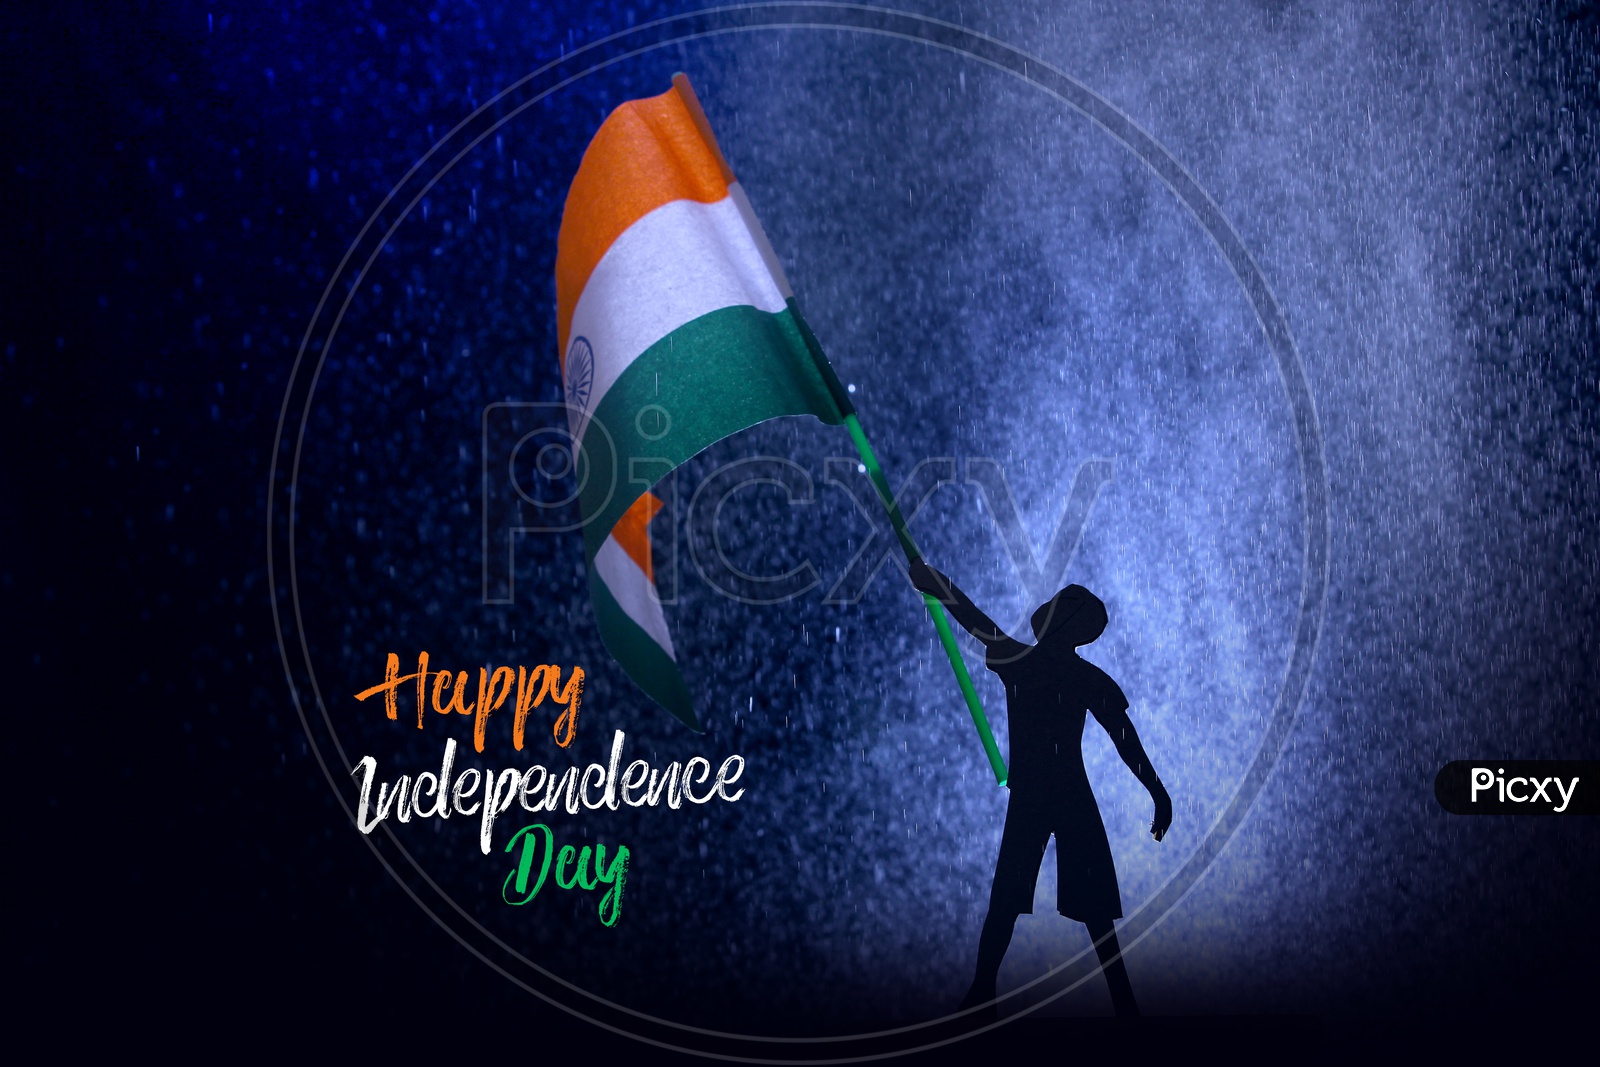 Happy Independence Day Poster With a Boy Having an Indian Flag in hand